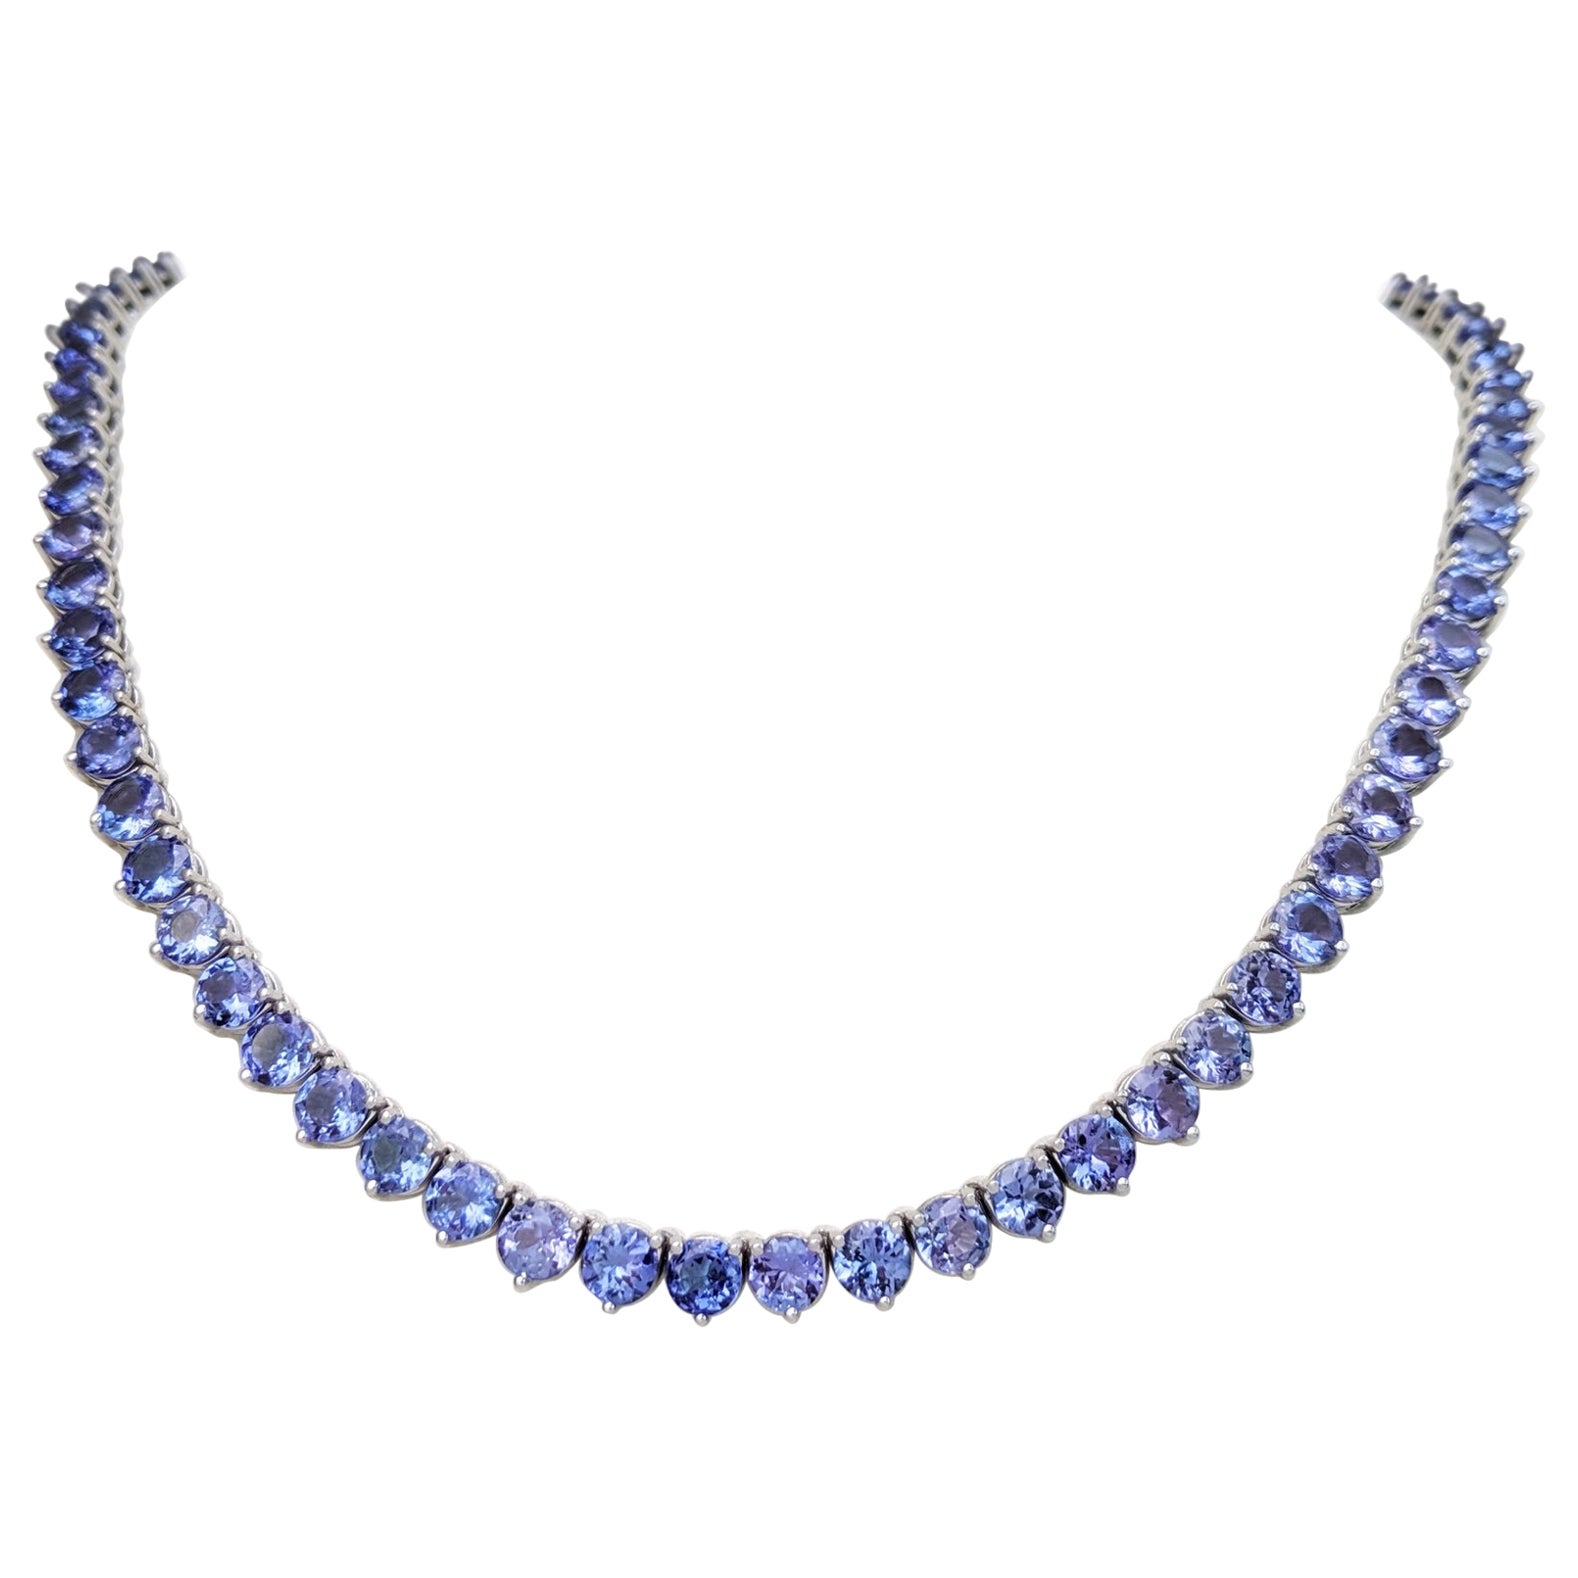 NO RESERVE! Necklace - 14 kt. White gold -  13.92 tw. Tanzanite For Sale